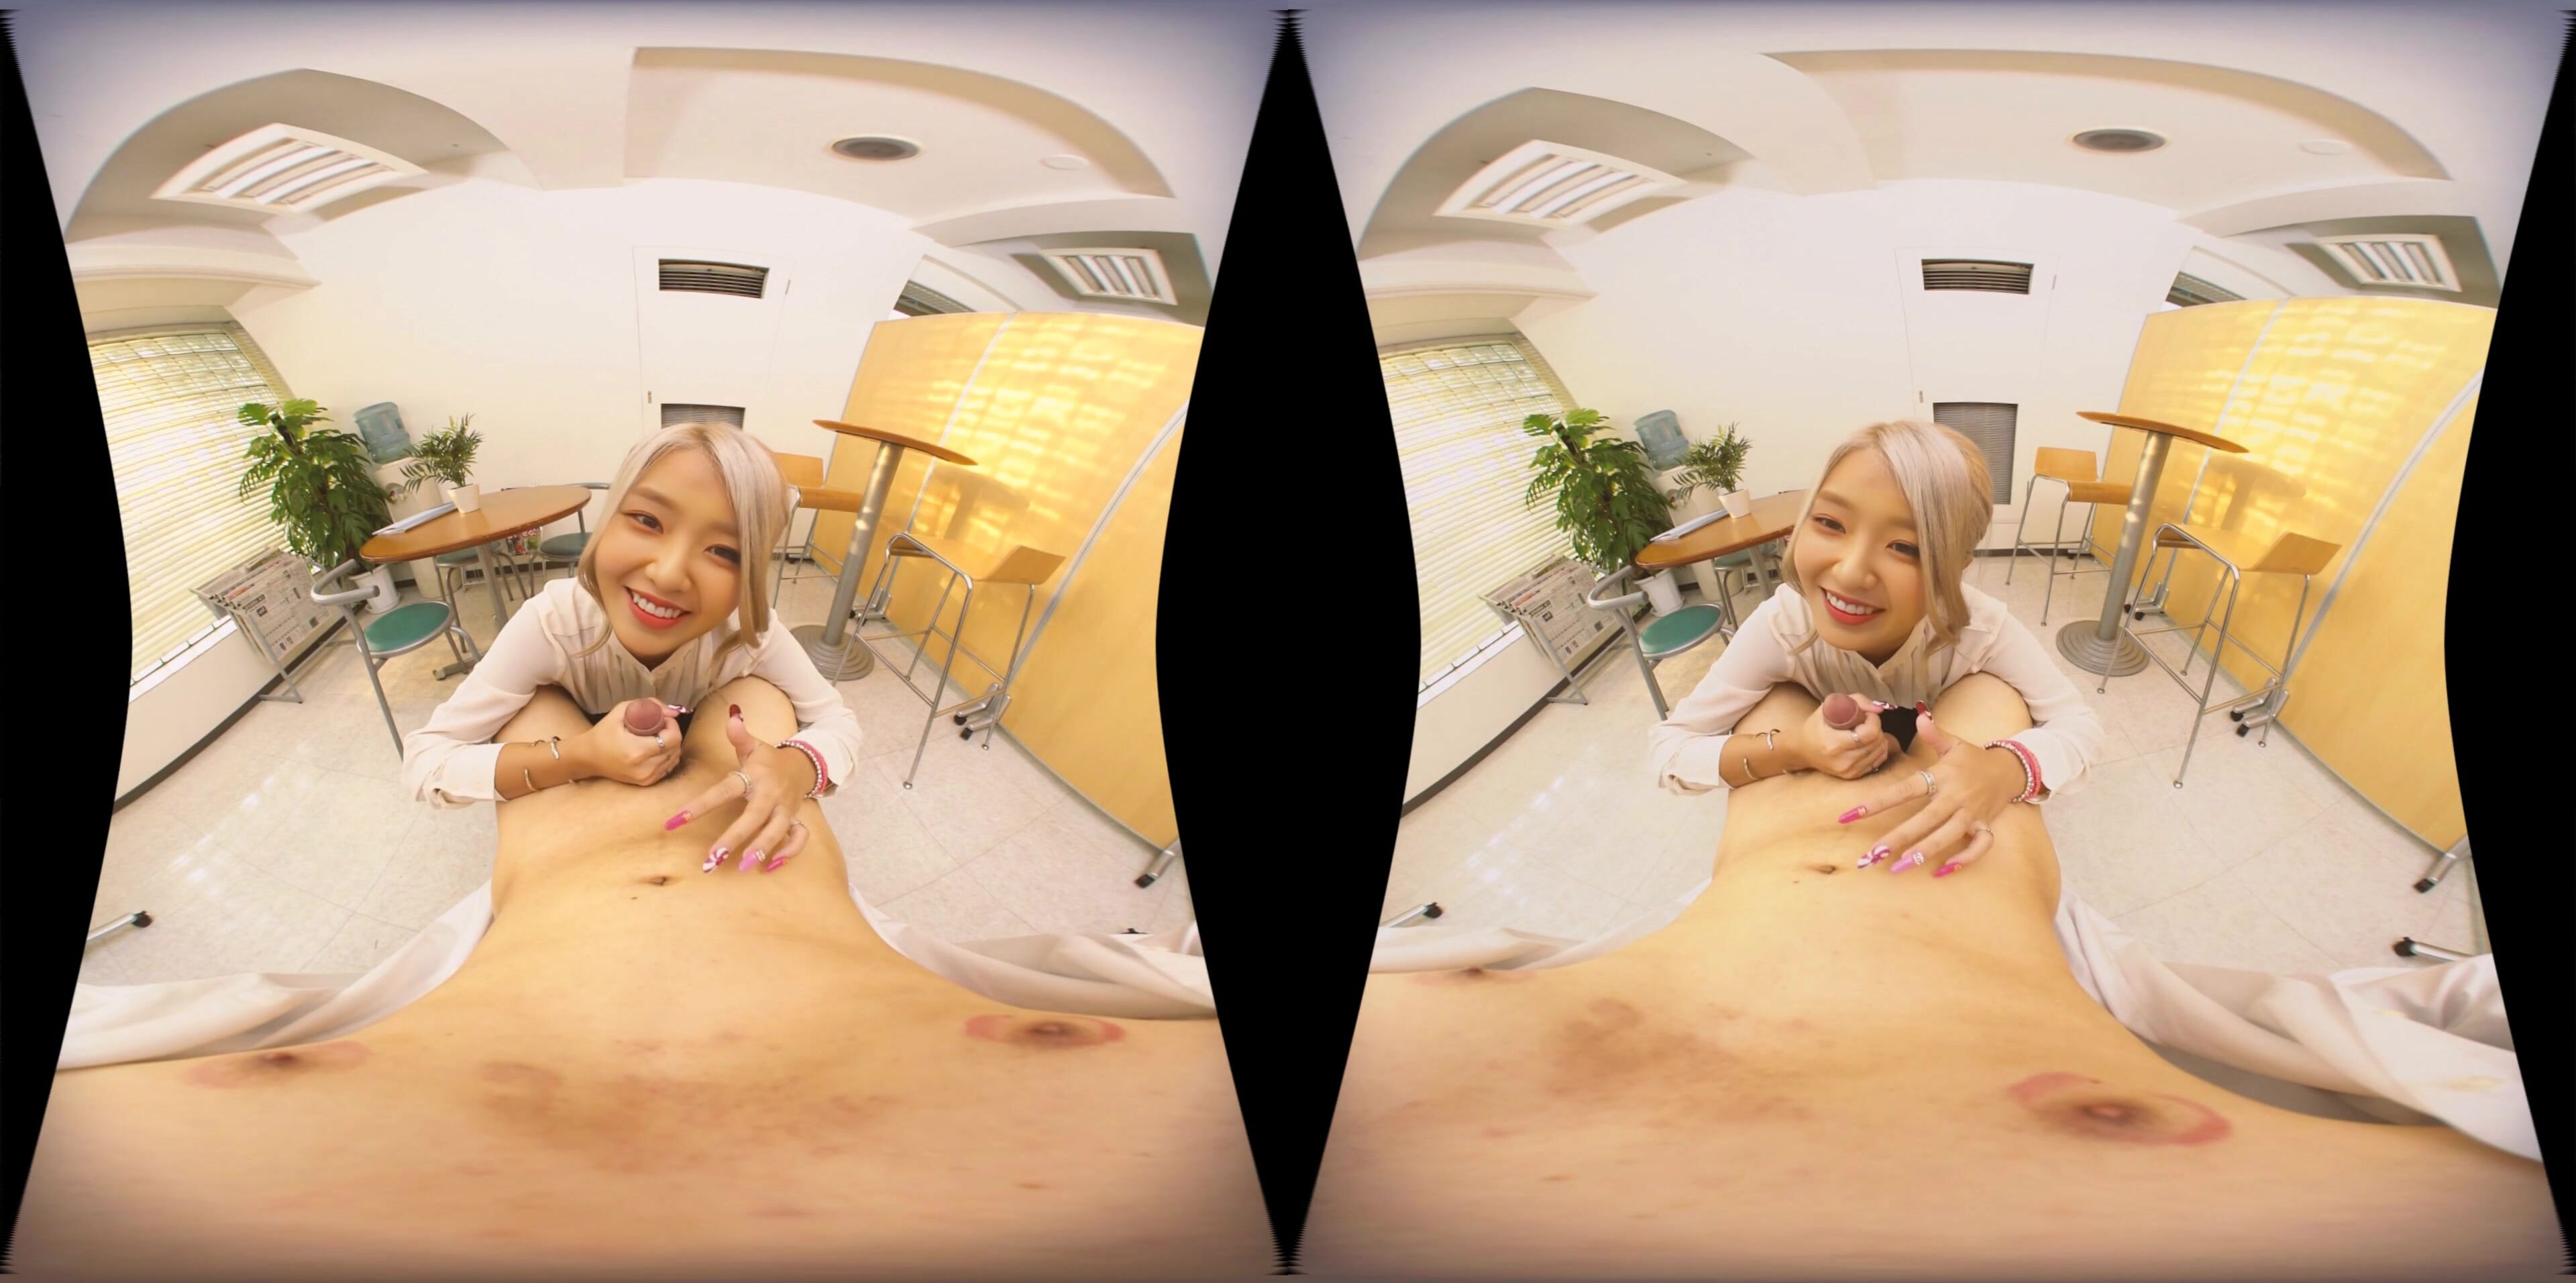 [VR] Sex in the office with IRENE sample